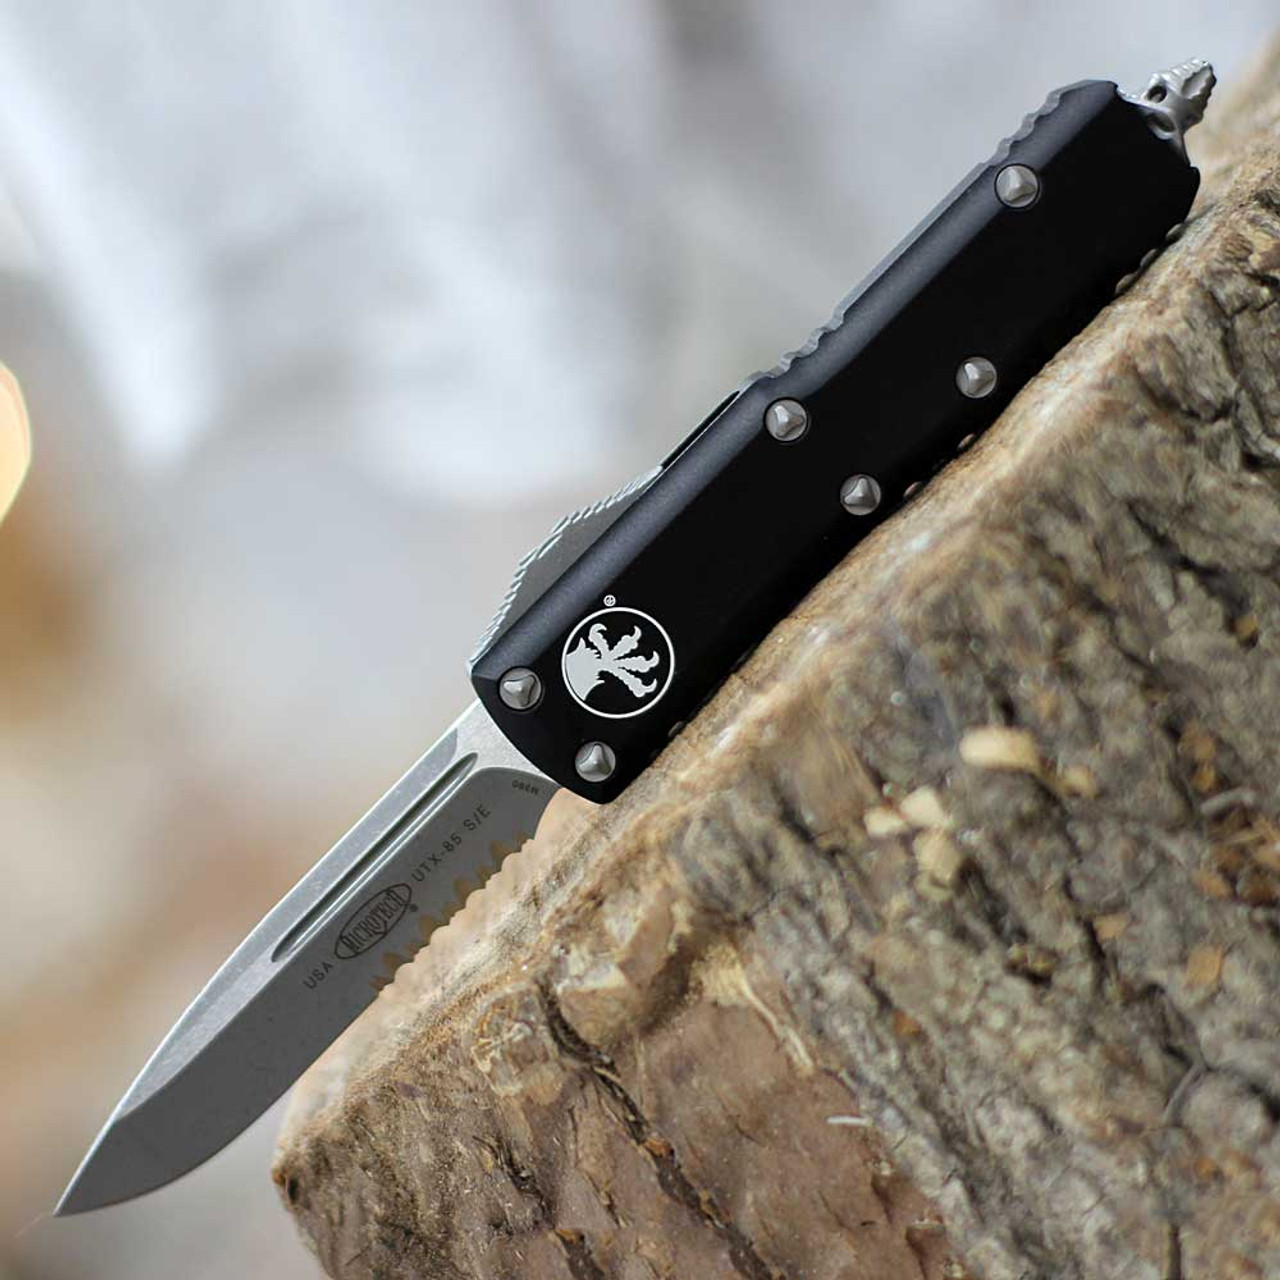 Microtech UTX-85 S/E (MCT23111AP) 3.125" Premium Steel Apocalyptic Finished Drop Point Partially Serrated Blade, Black Handle